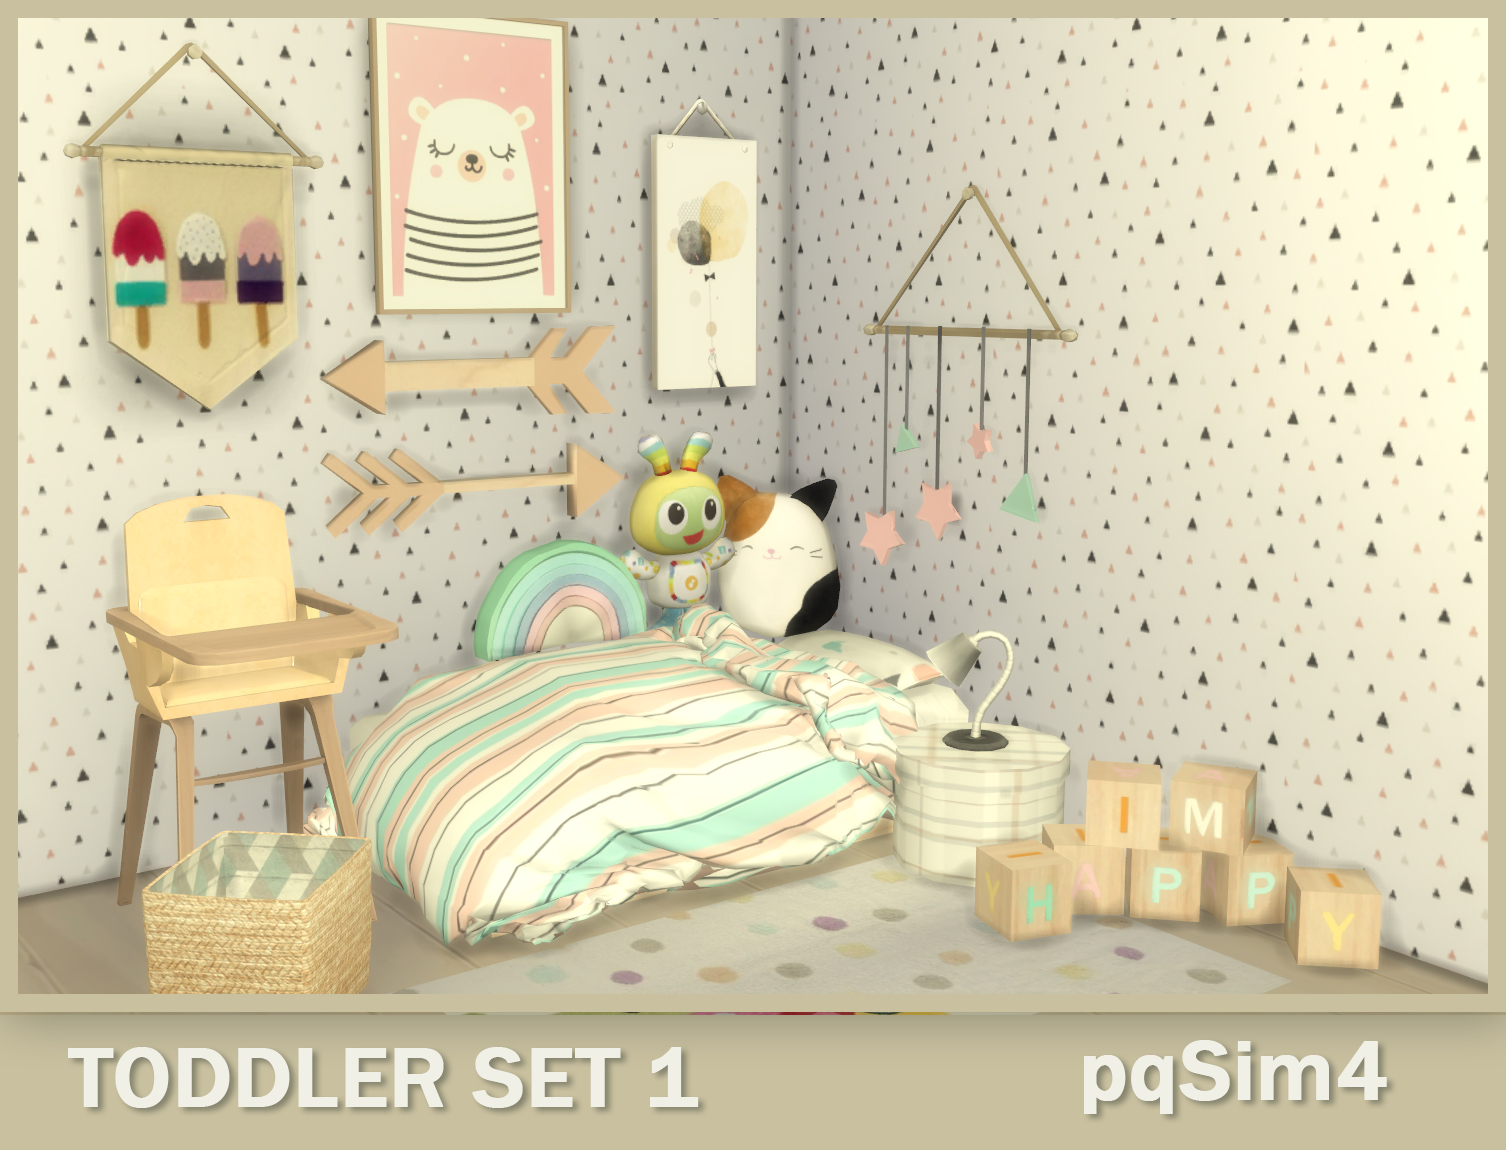 Toddler Set 1 The Sims 4 Custom Content